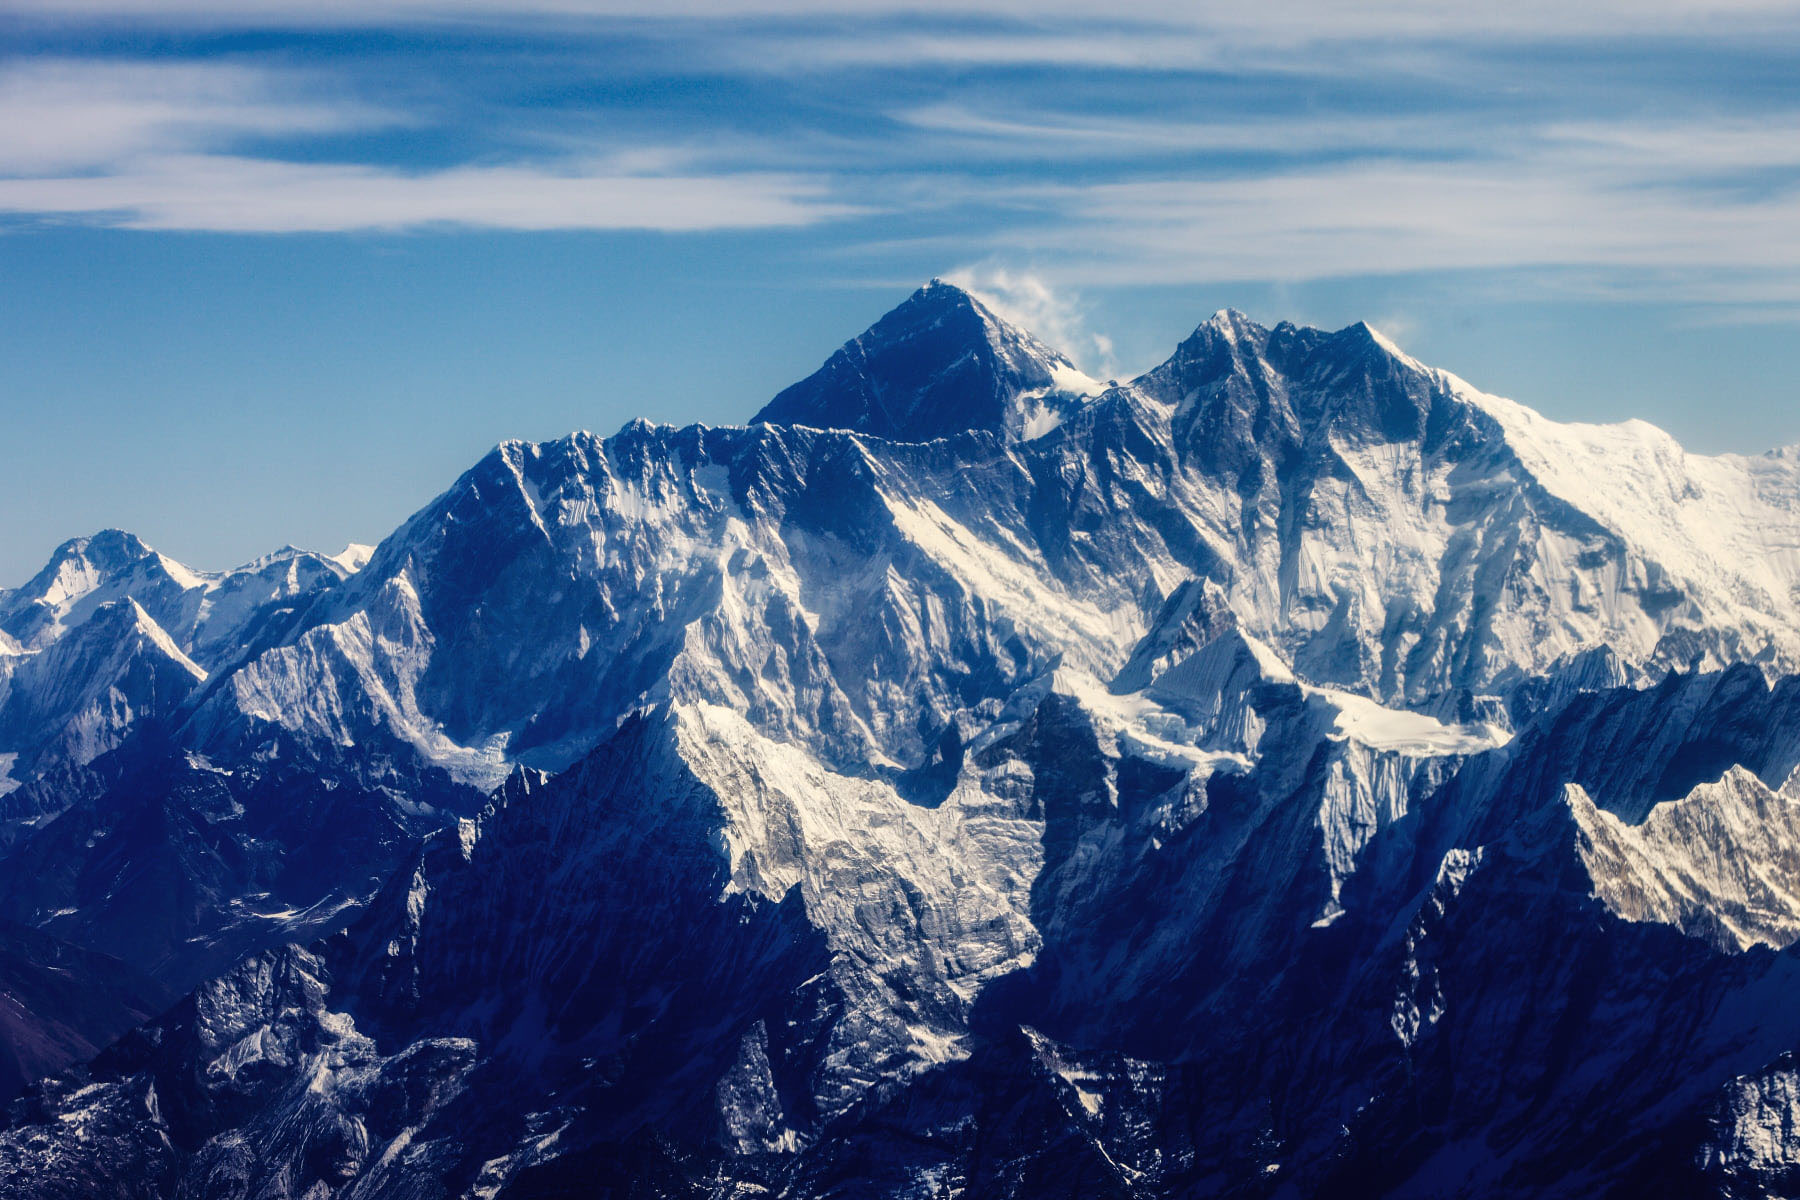 As many as 400 foreign climbers set to climb Mt Everest this Spring